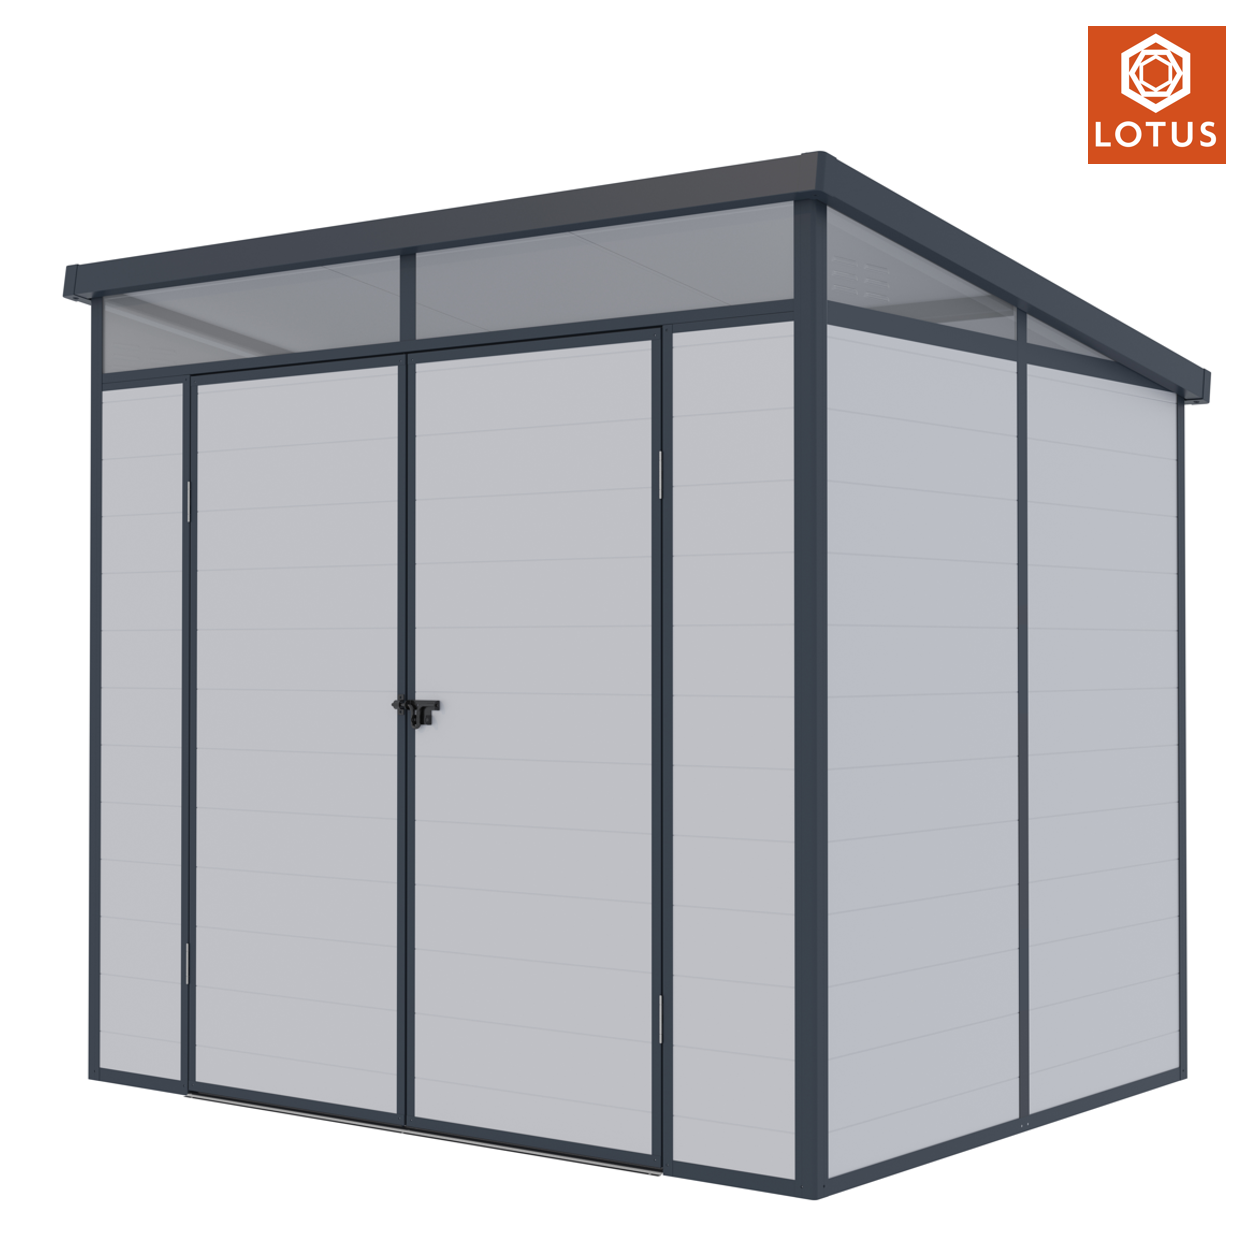 Featured image for “LOTUS | Canto Pent Plastic Shed™”